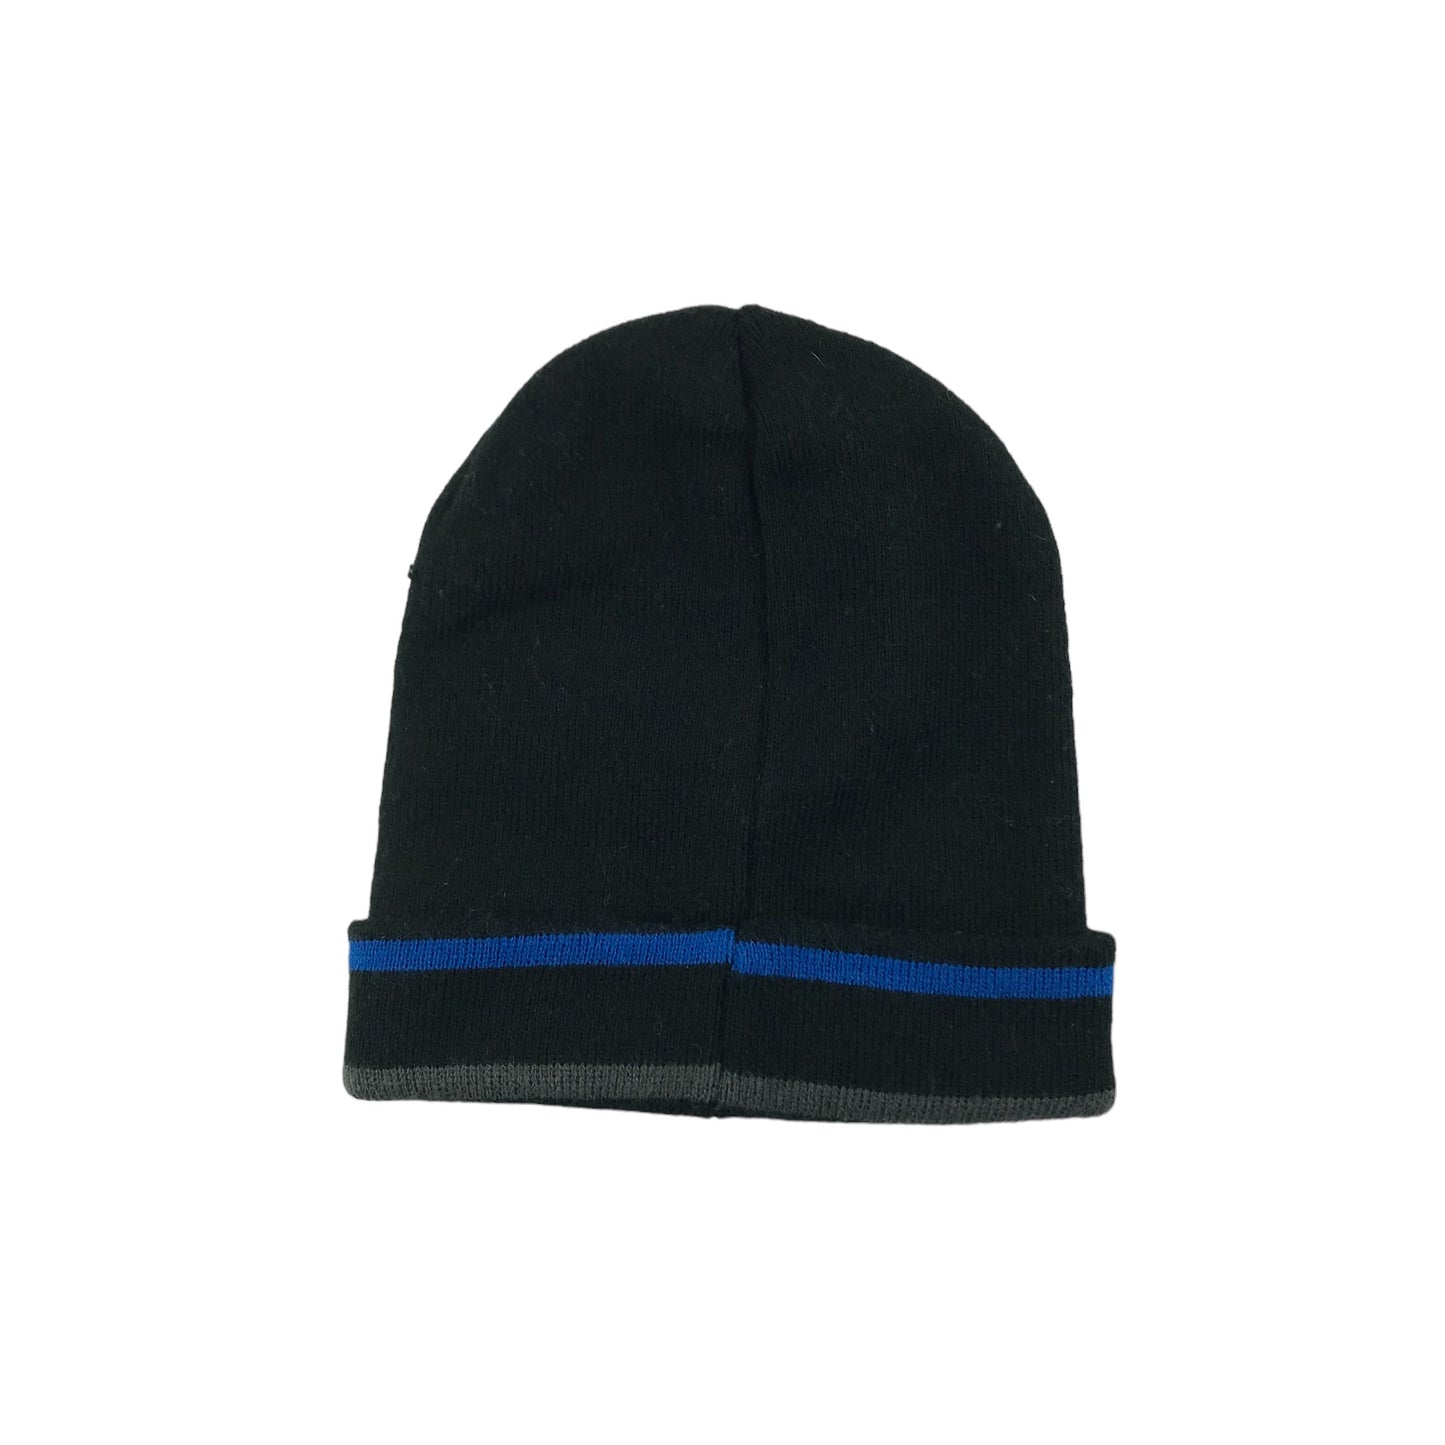 PlayStation Beanie ONE SIZE Black and Blue